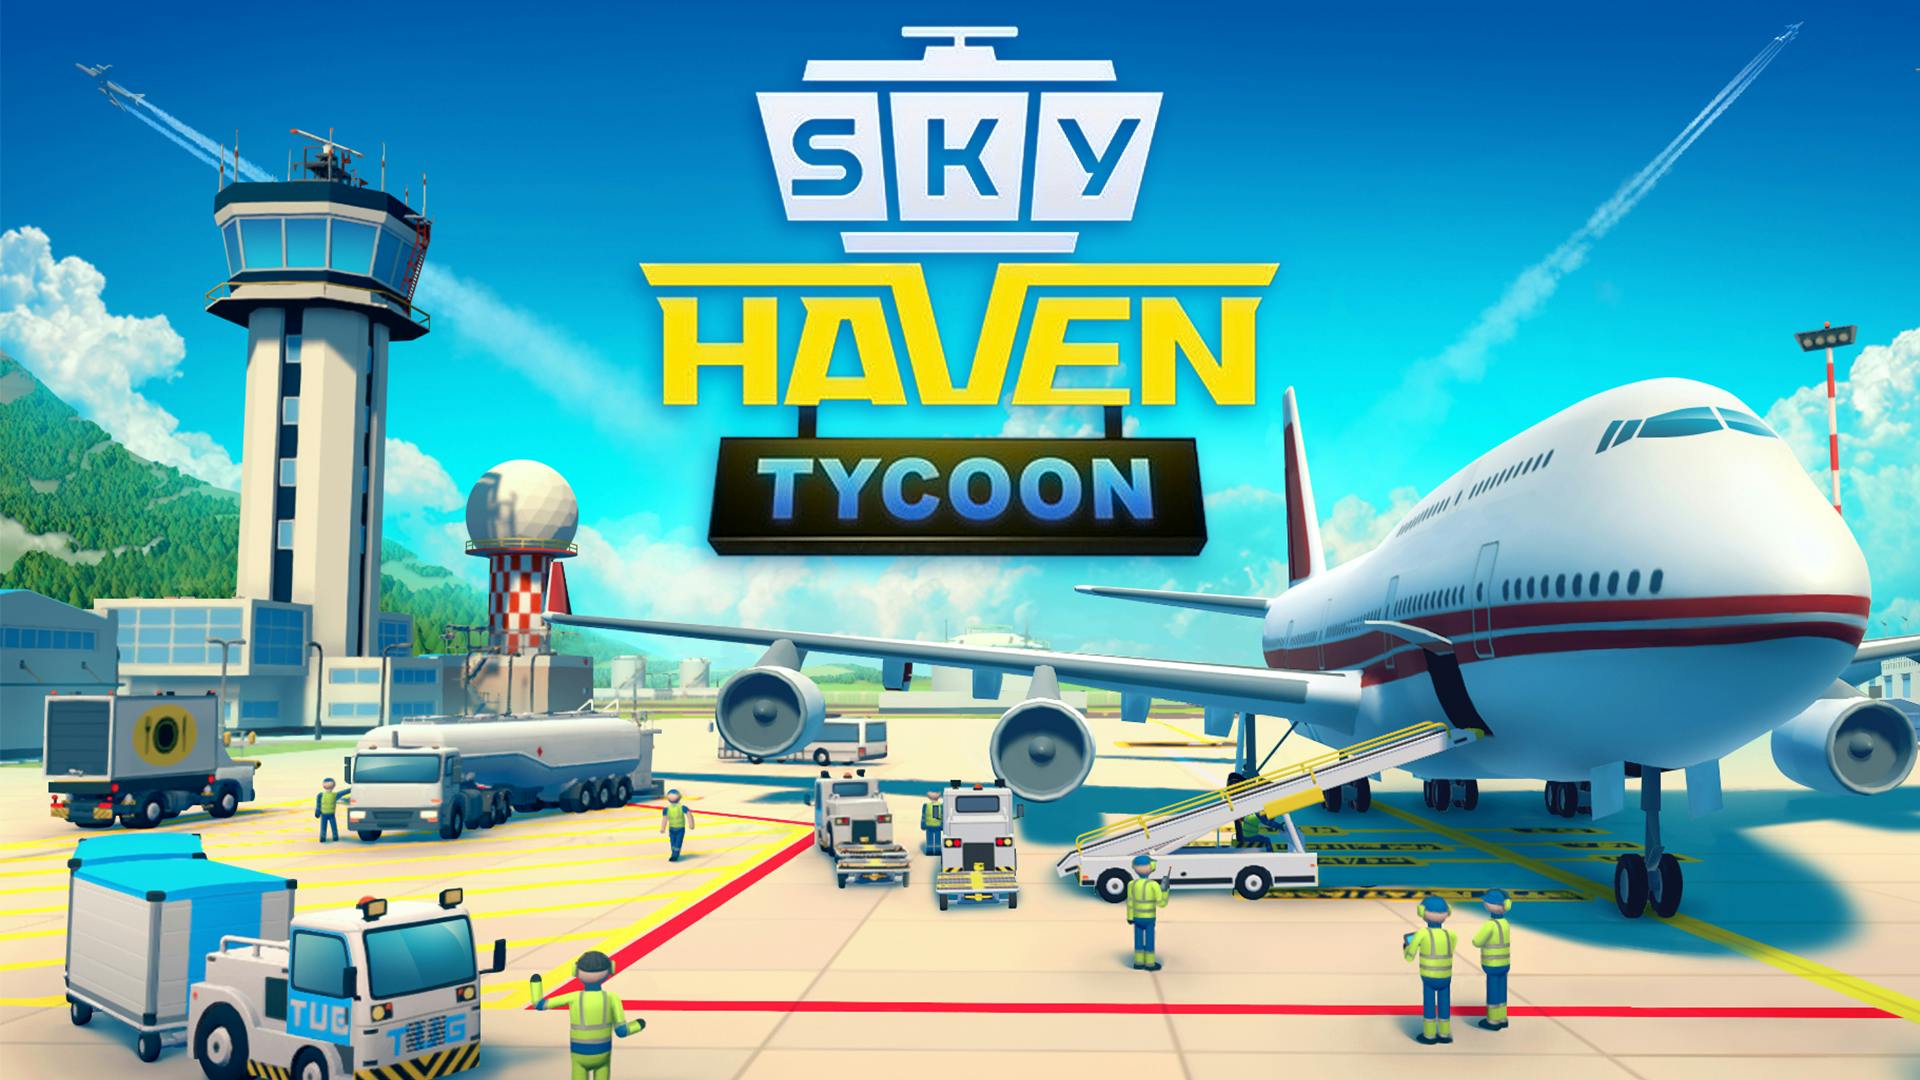 Sky Haven Tycoon Airport Simulator Pc Steam Game Fanatical